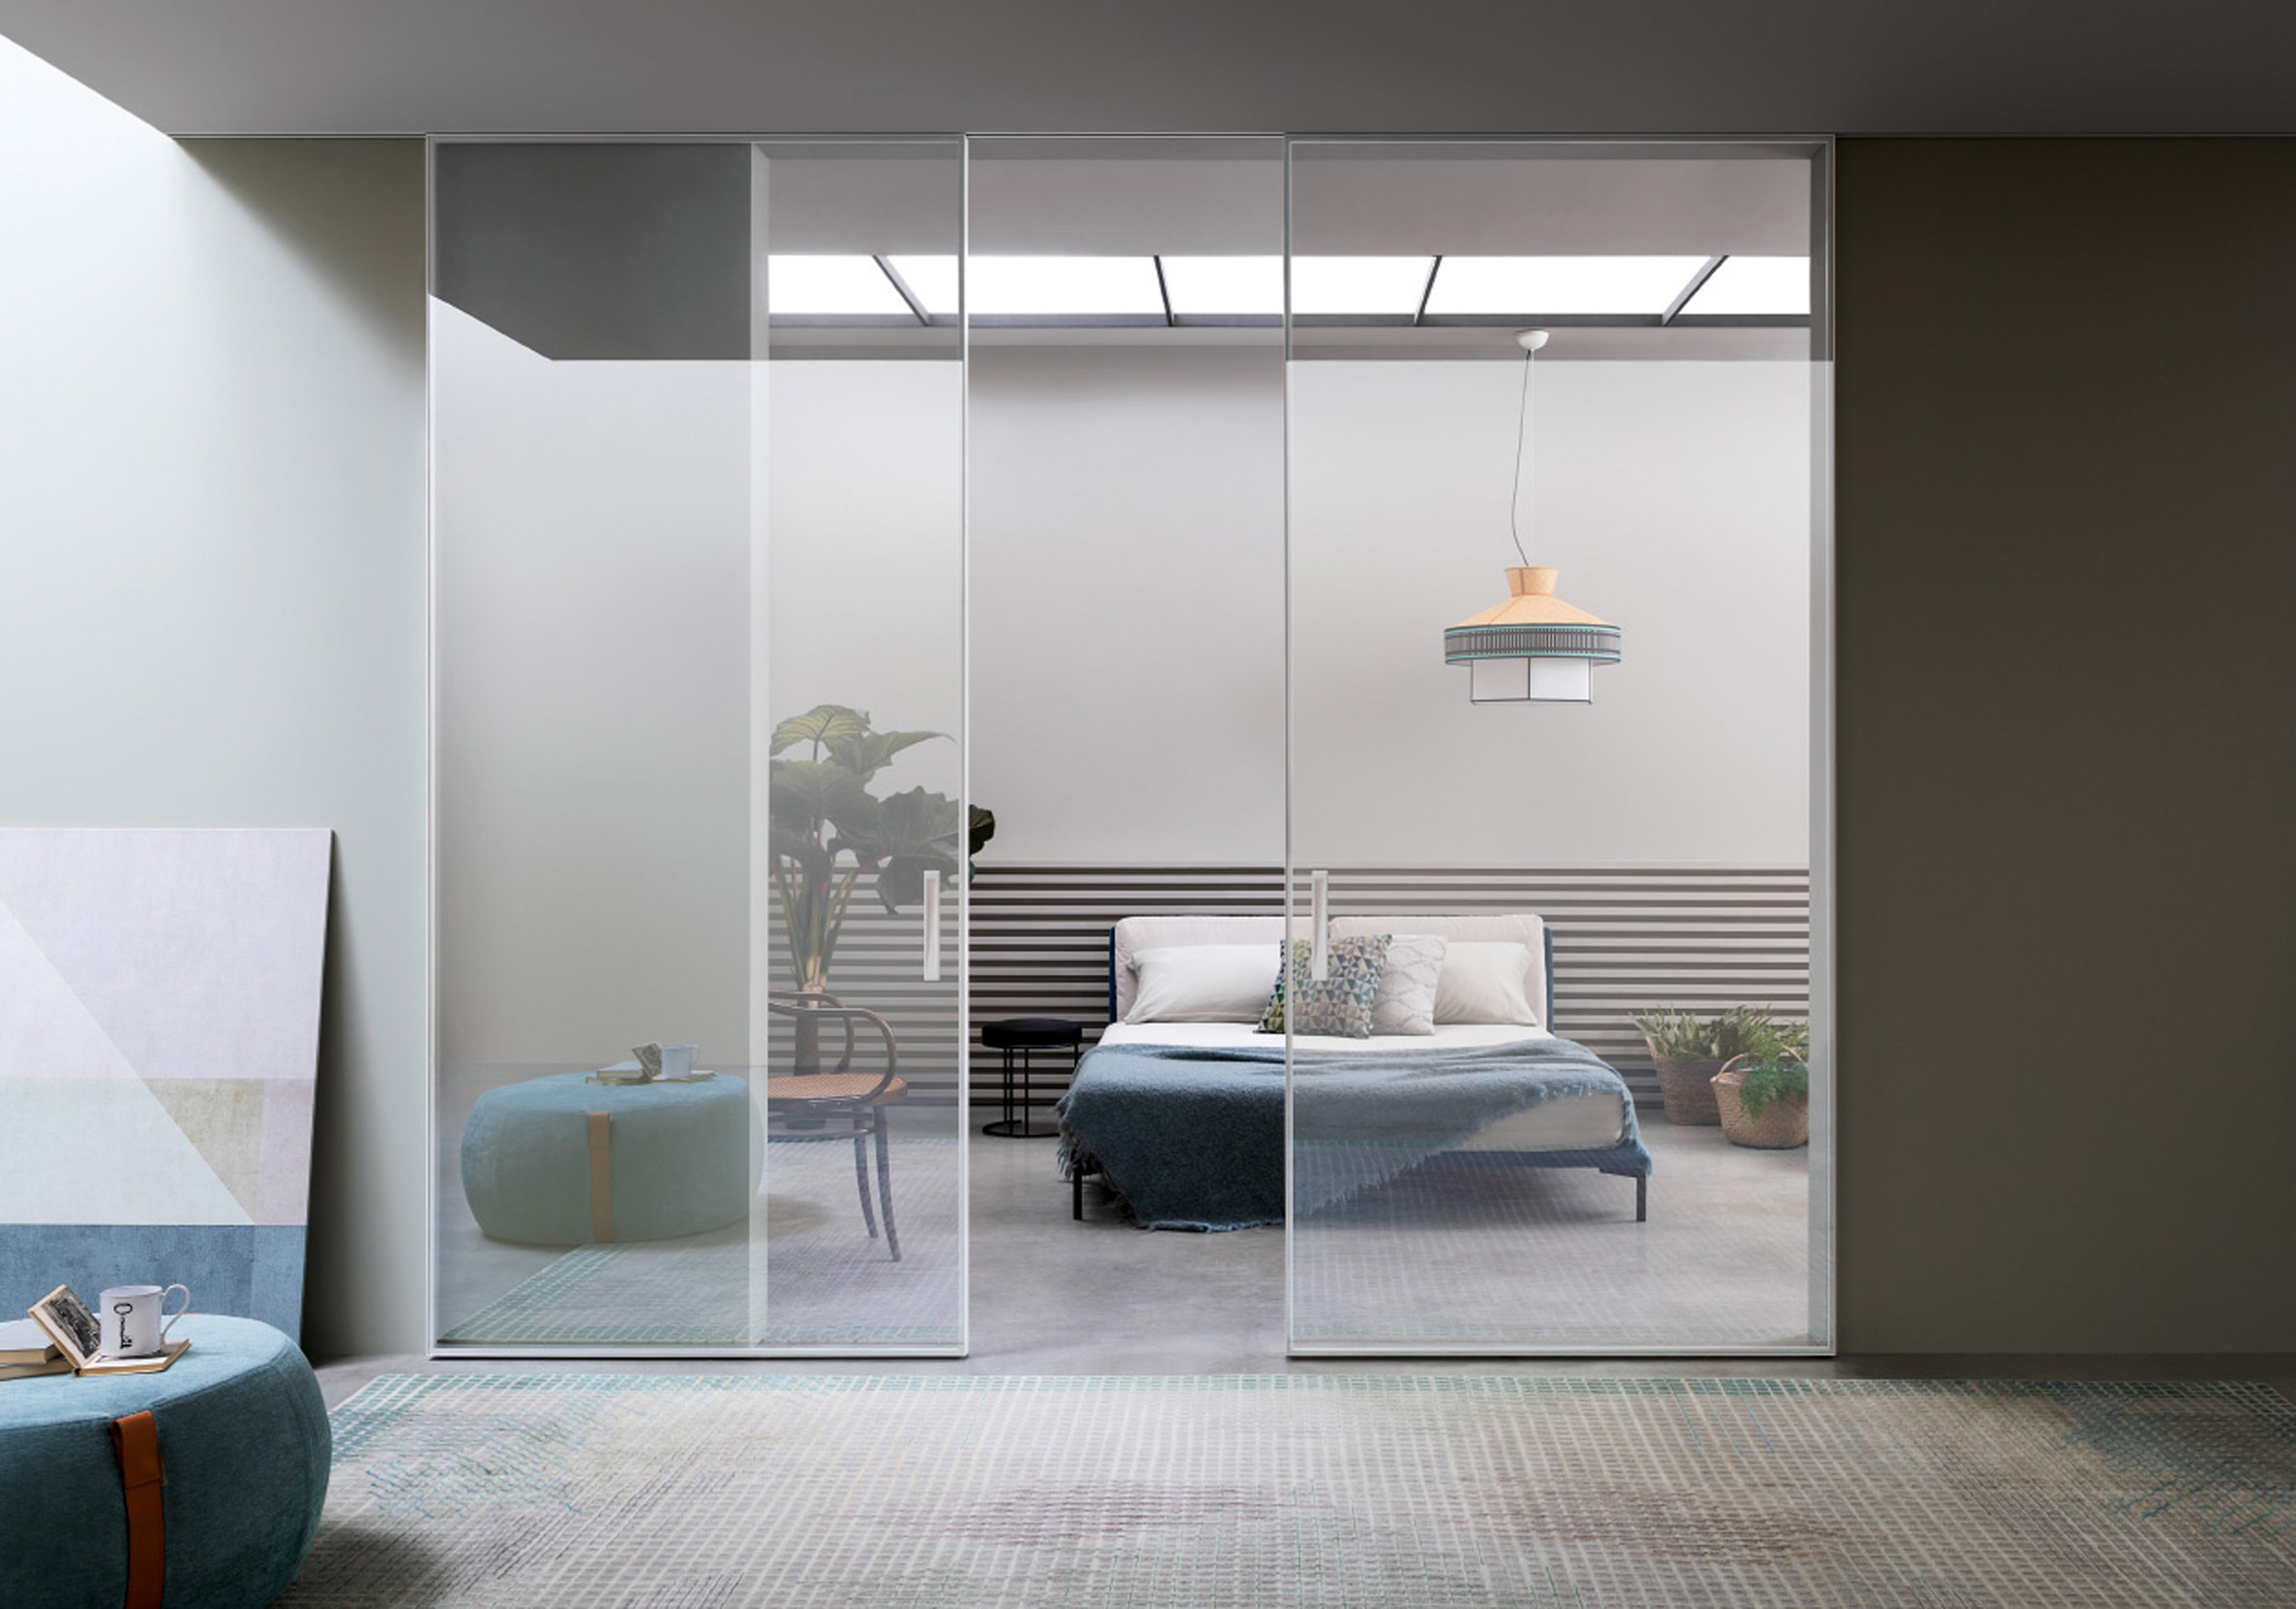 Extraclear glass sliding doors across a bedroom